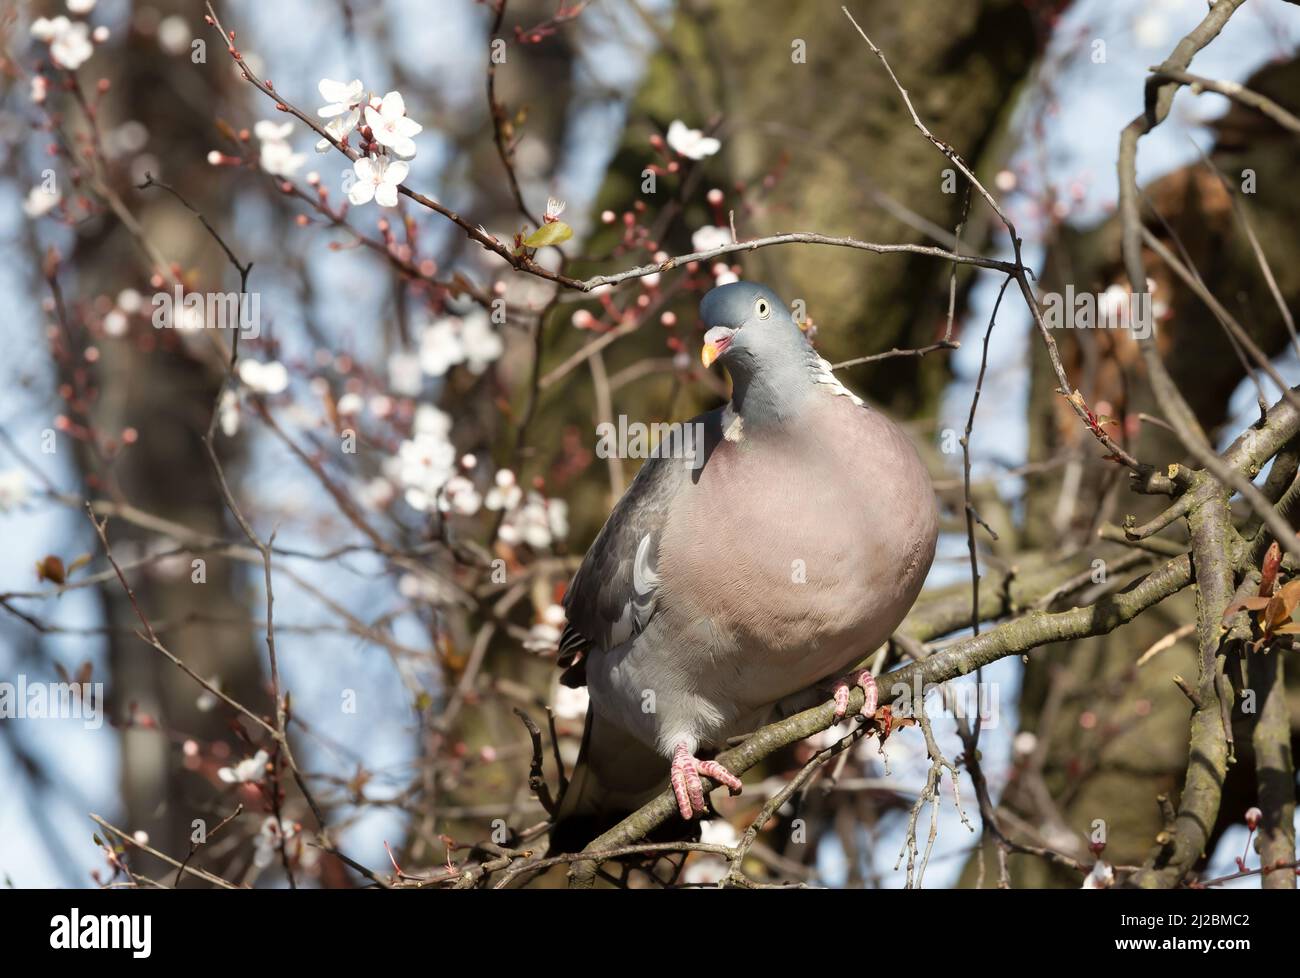 Close up of a common wood pigeon (Columba palumbus) perched in a tree with flourishing flowers in spring, UK. Stock Photo